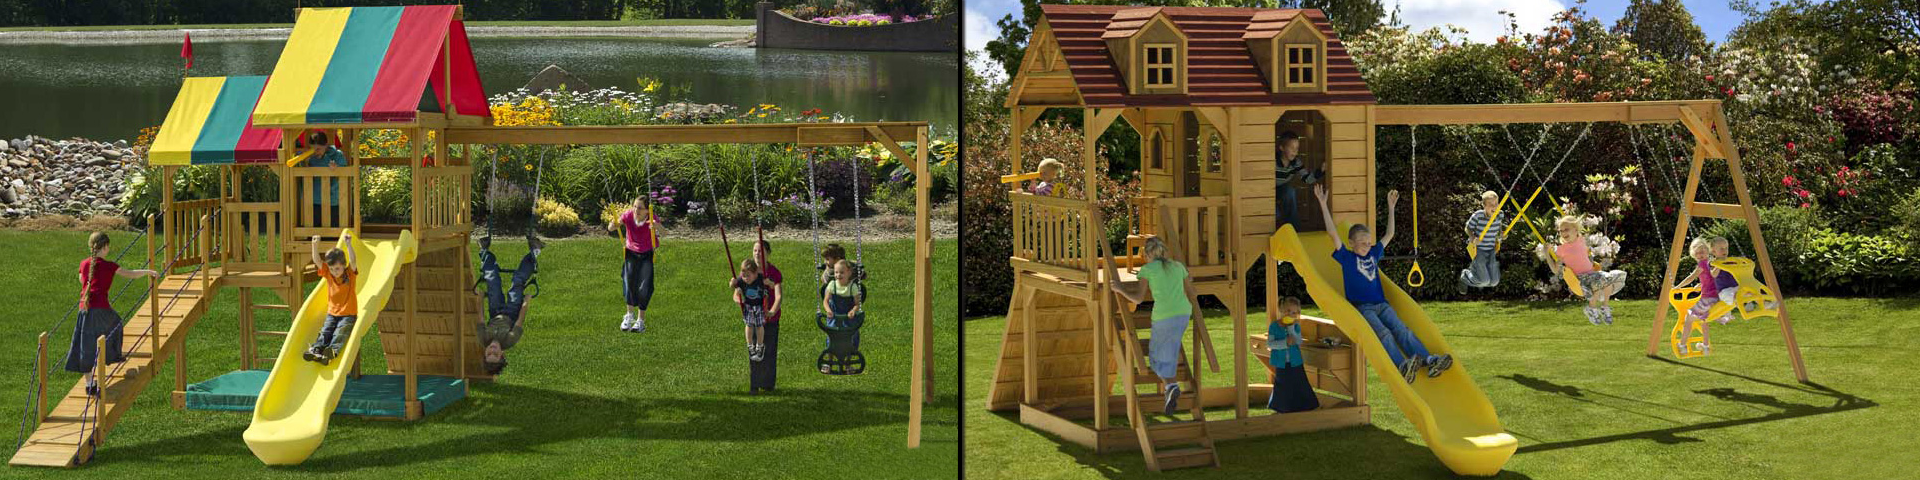 Pro Edge Play Mor Playsets